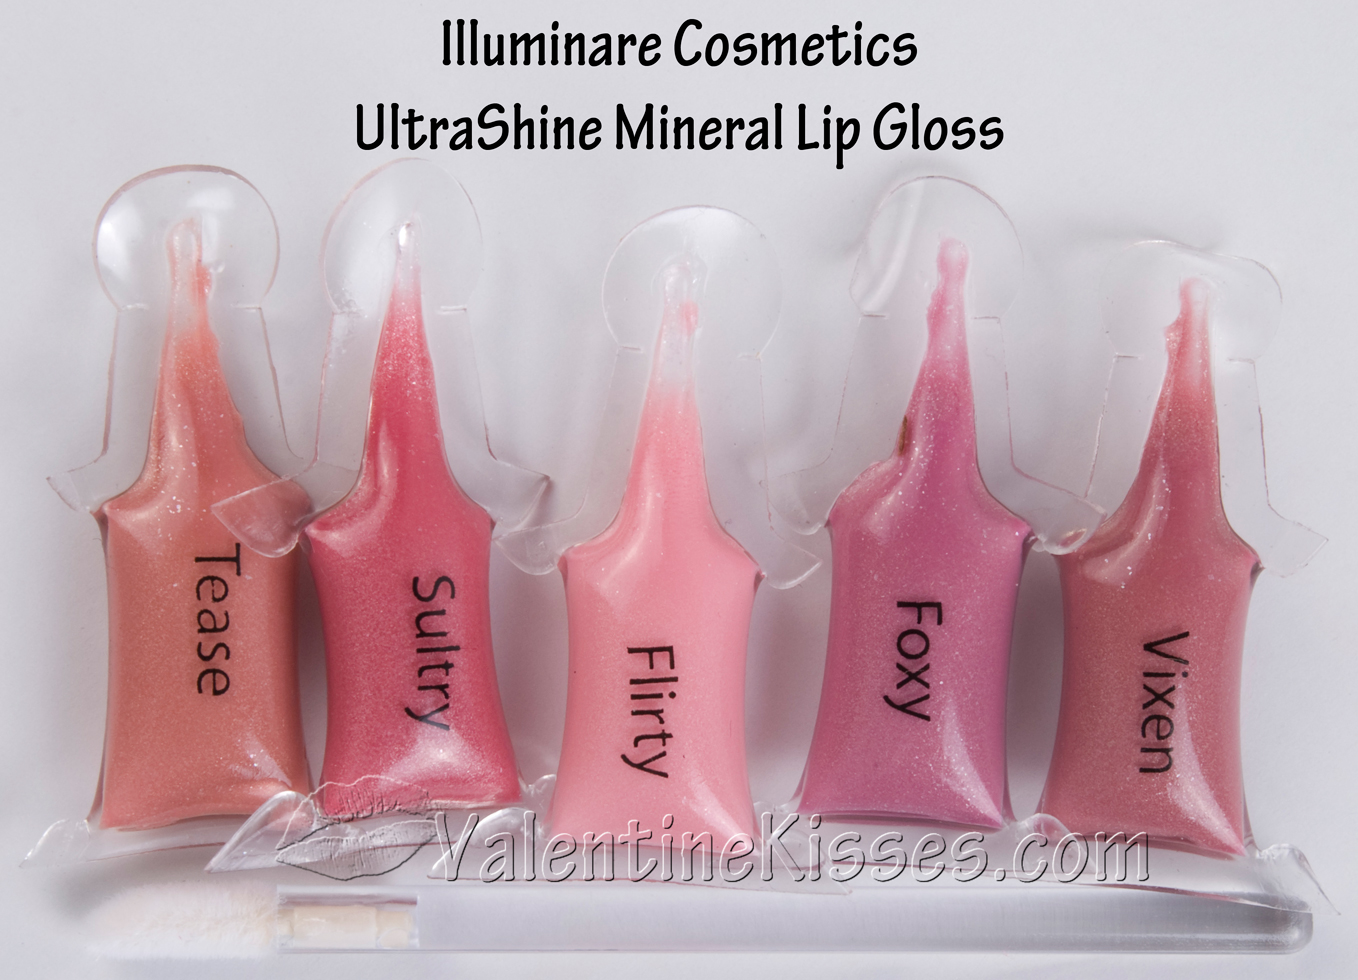 Valentine Kisses: Illuminare UltraShine Mineral Lip Gloss in Tease, Sultry,  Flirty, Foxy, Vixen - swatches, pics, review